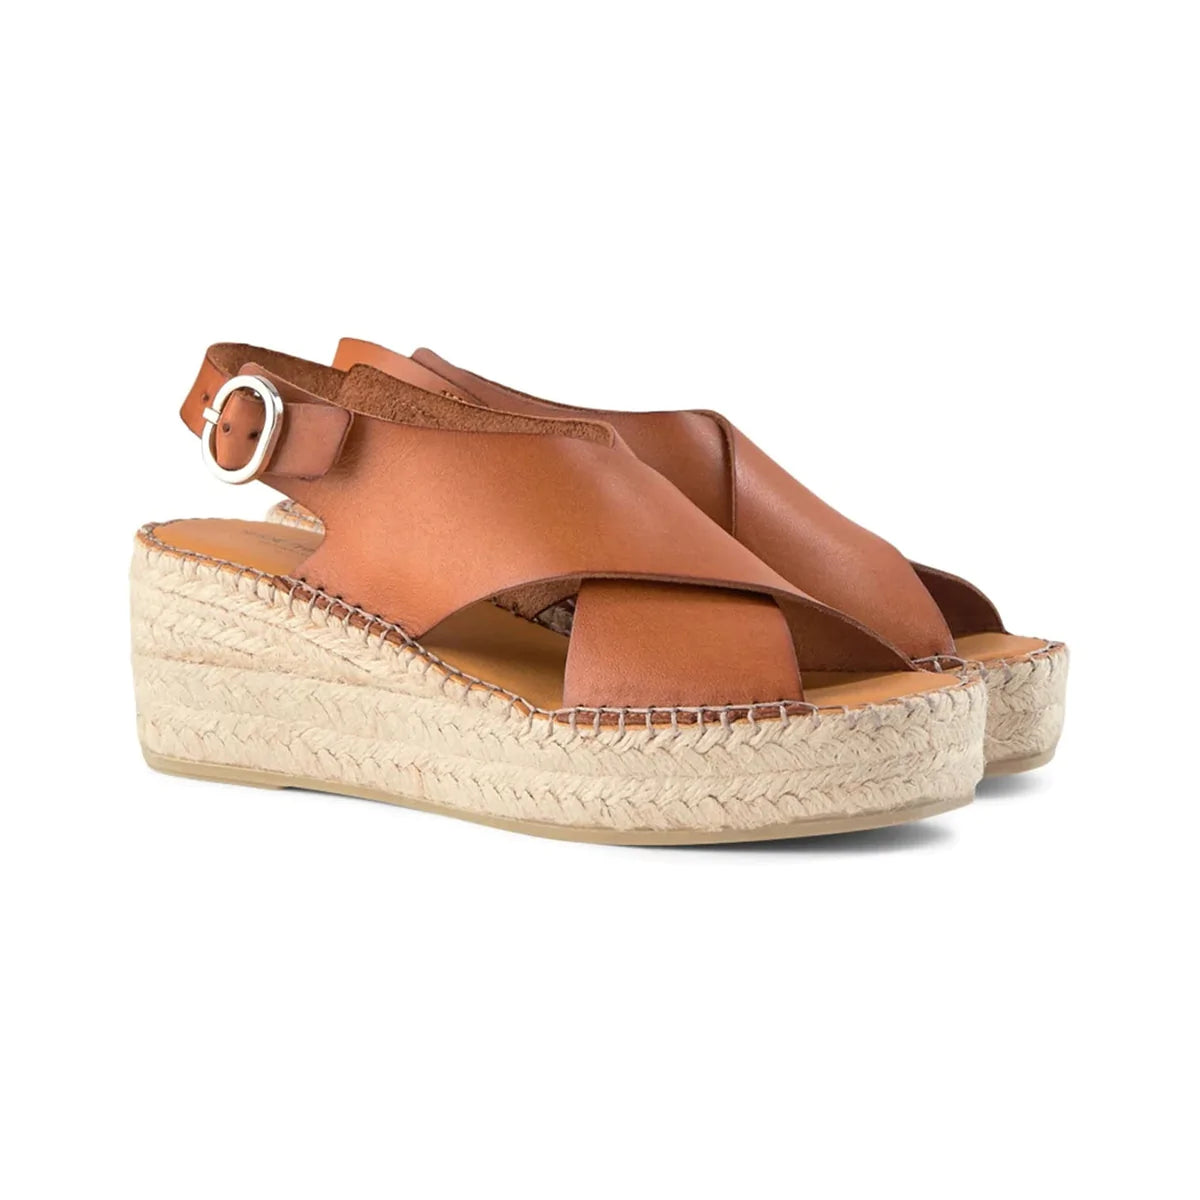 Shoe The Bear Tan Orchid Leather Wedges